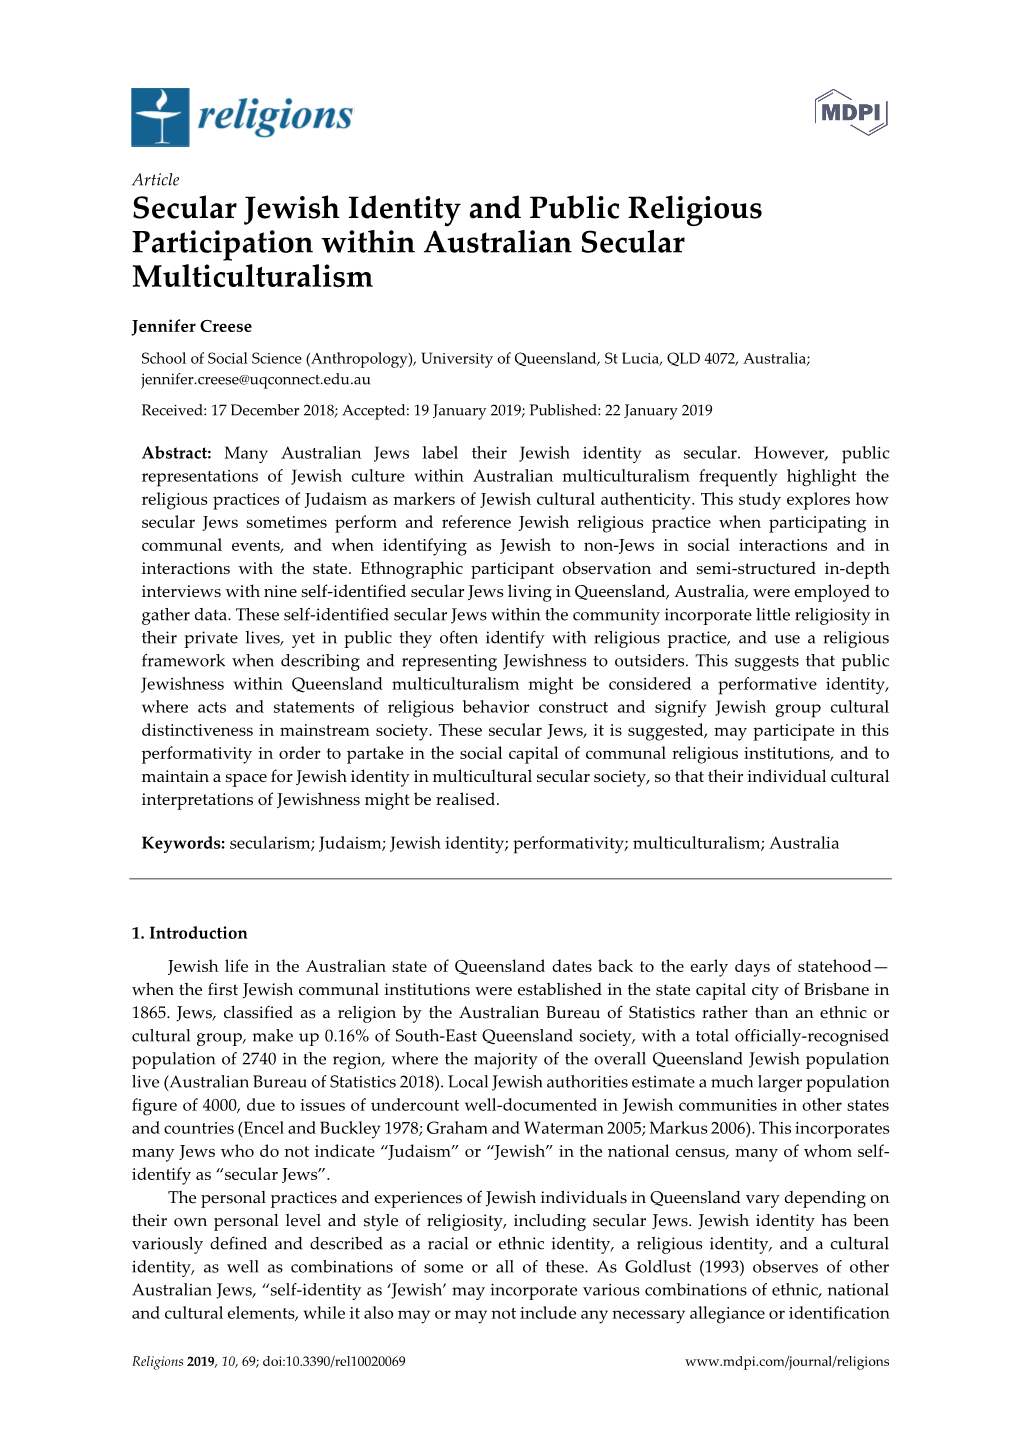 Secular Jewish Identity and Public Religious Participation Within Australian Secular Multiculturalism